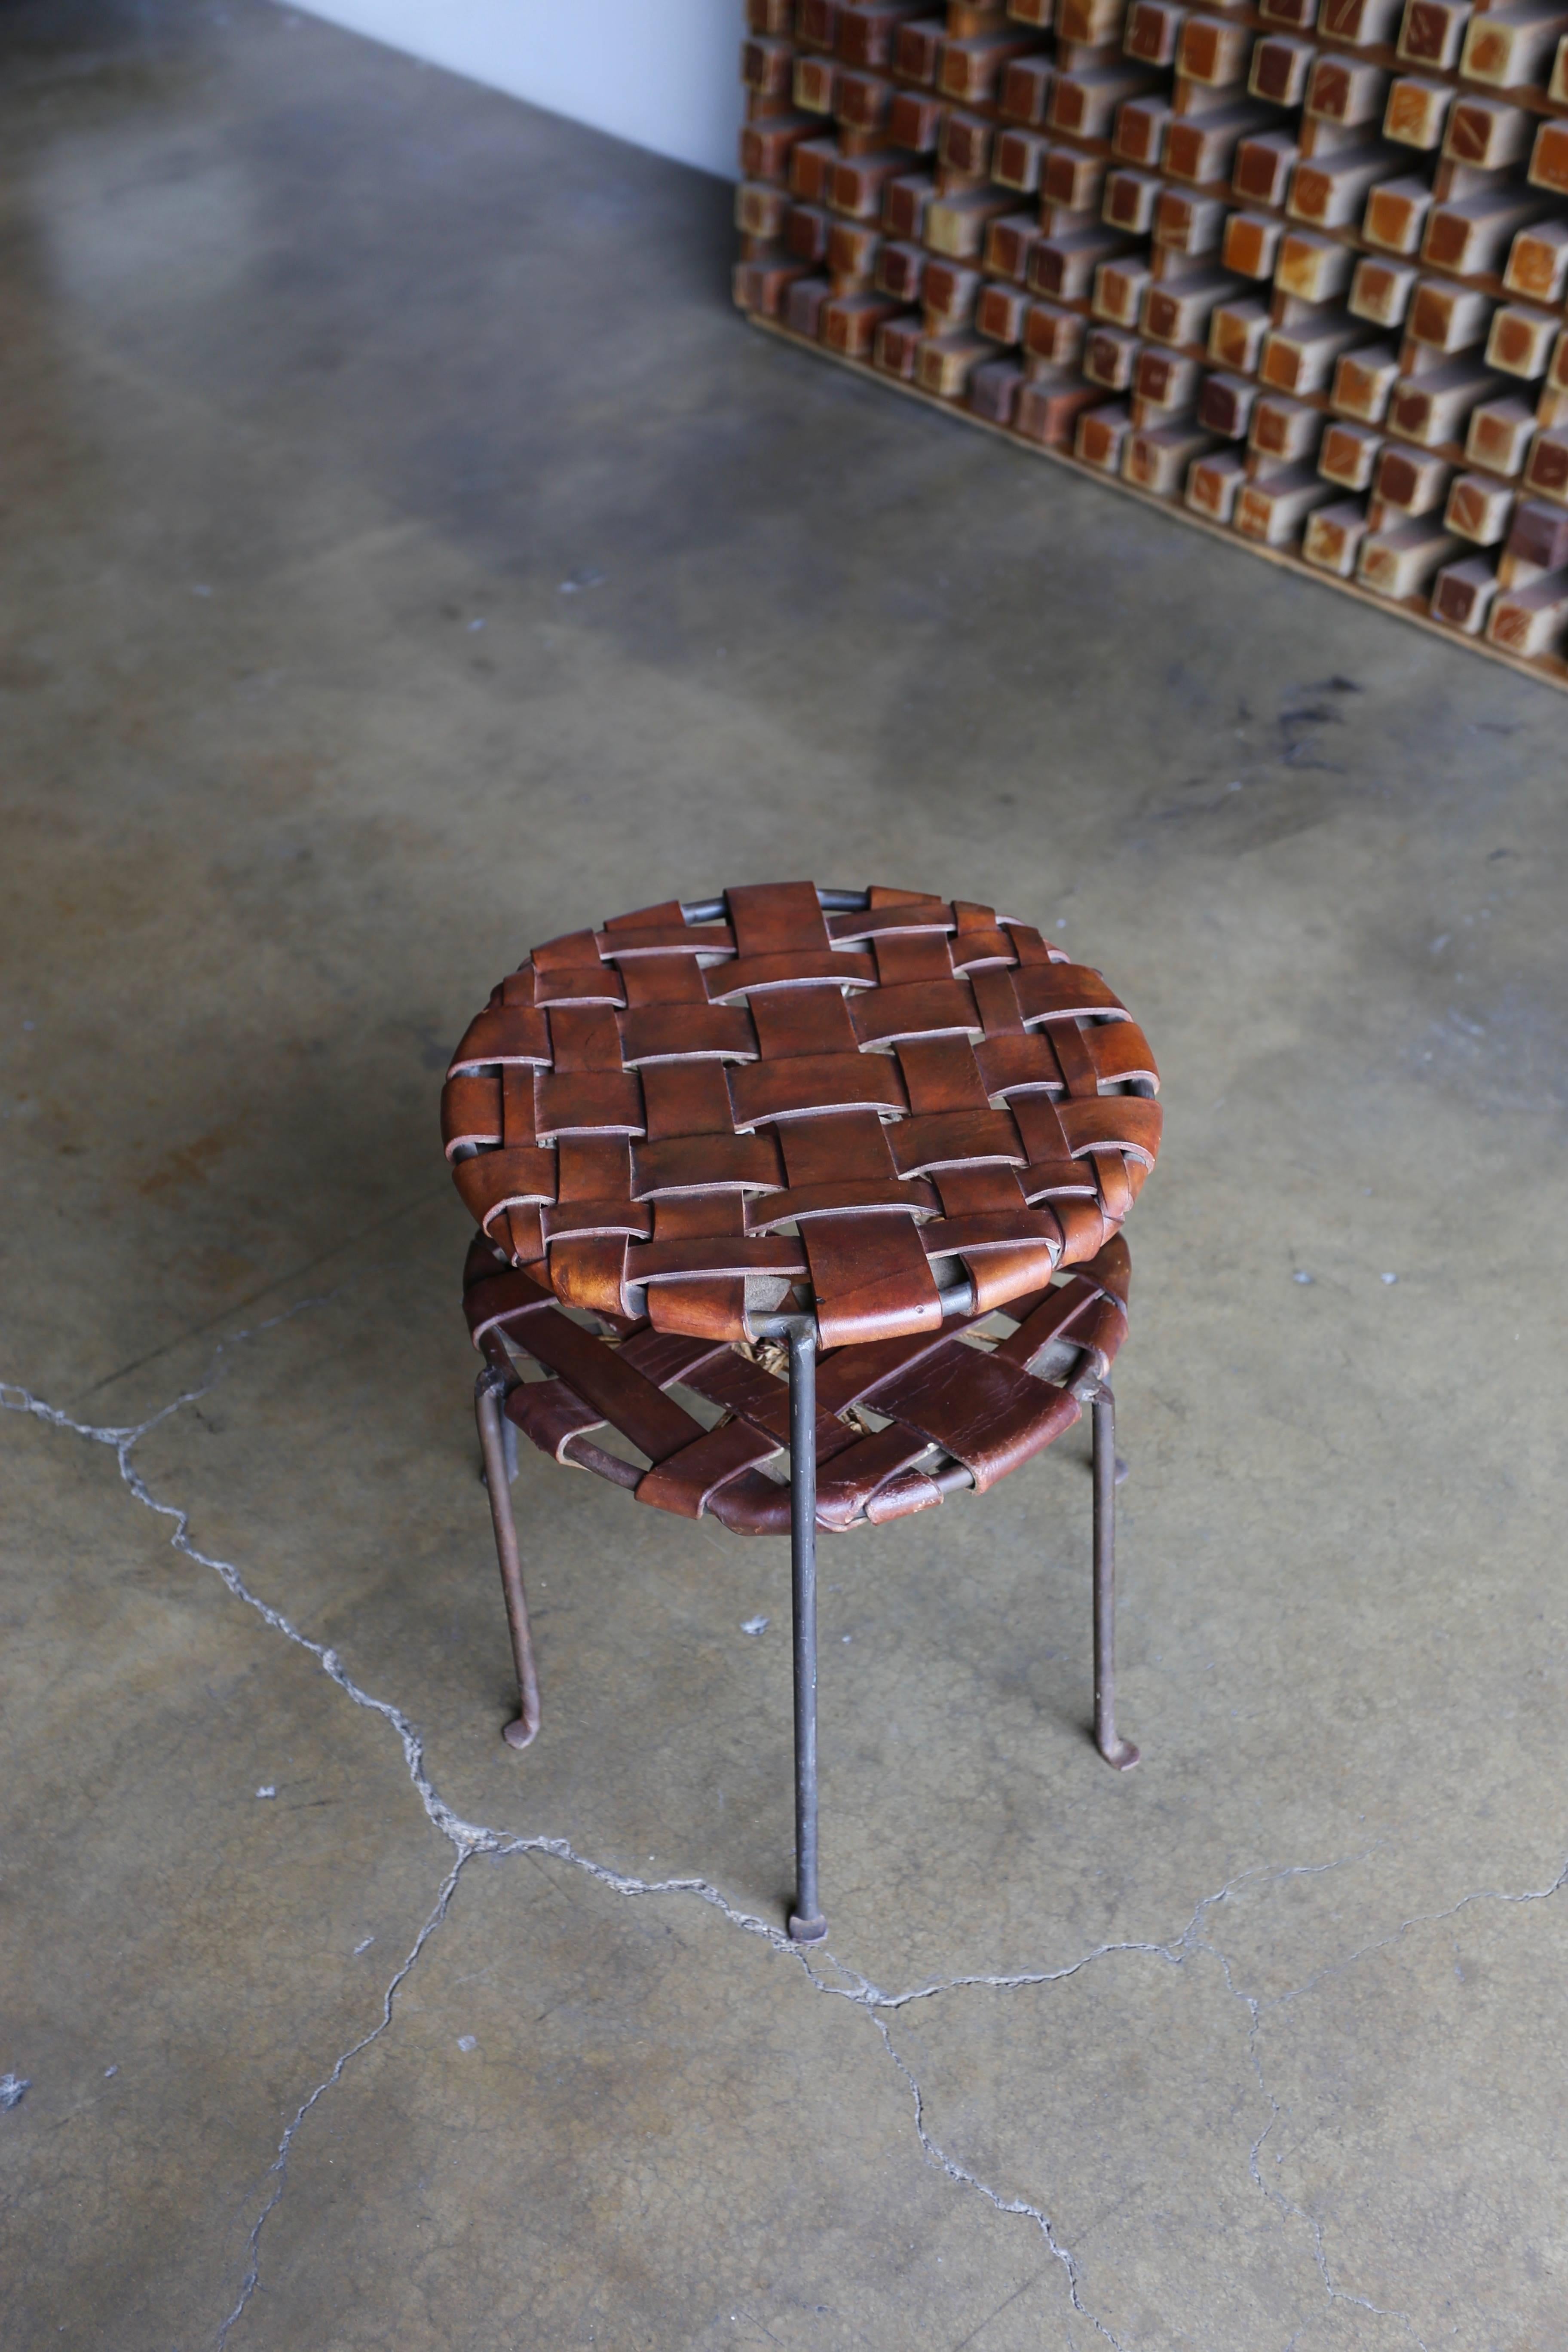 Iron and leather stools by Lila Swift and Donald Monell.

Measures: 16.25